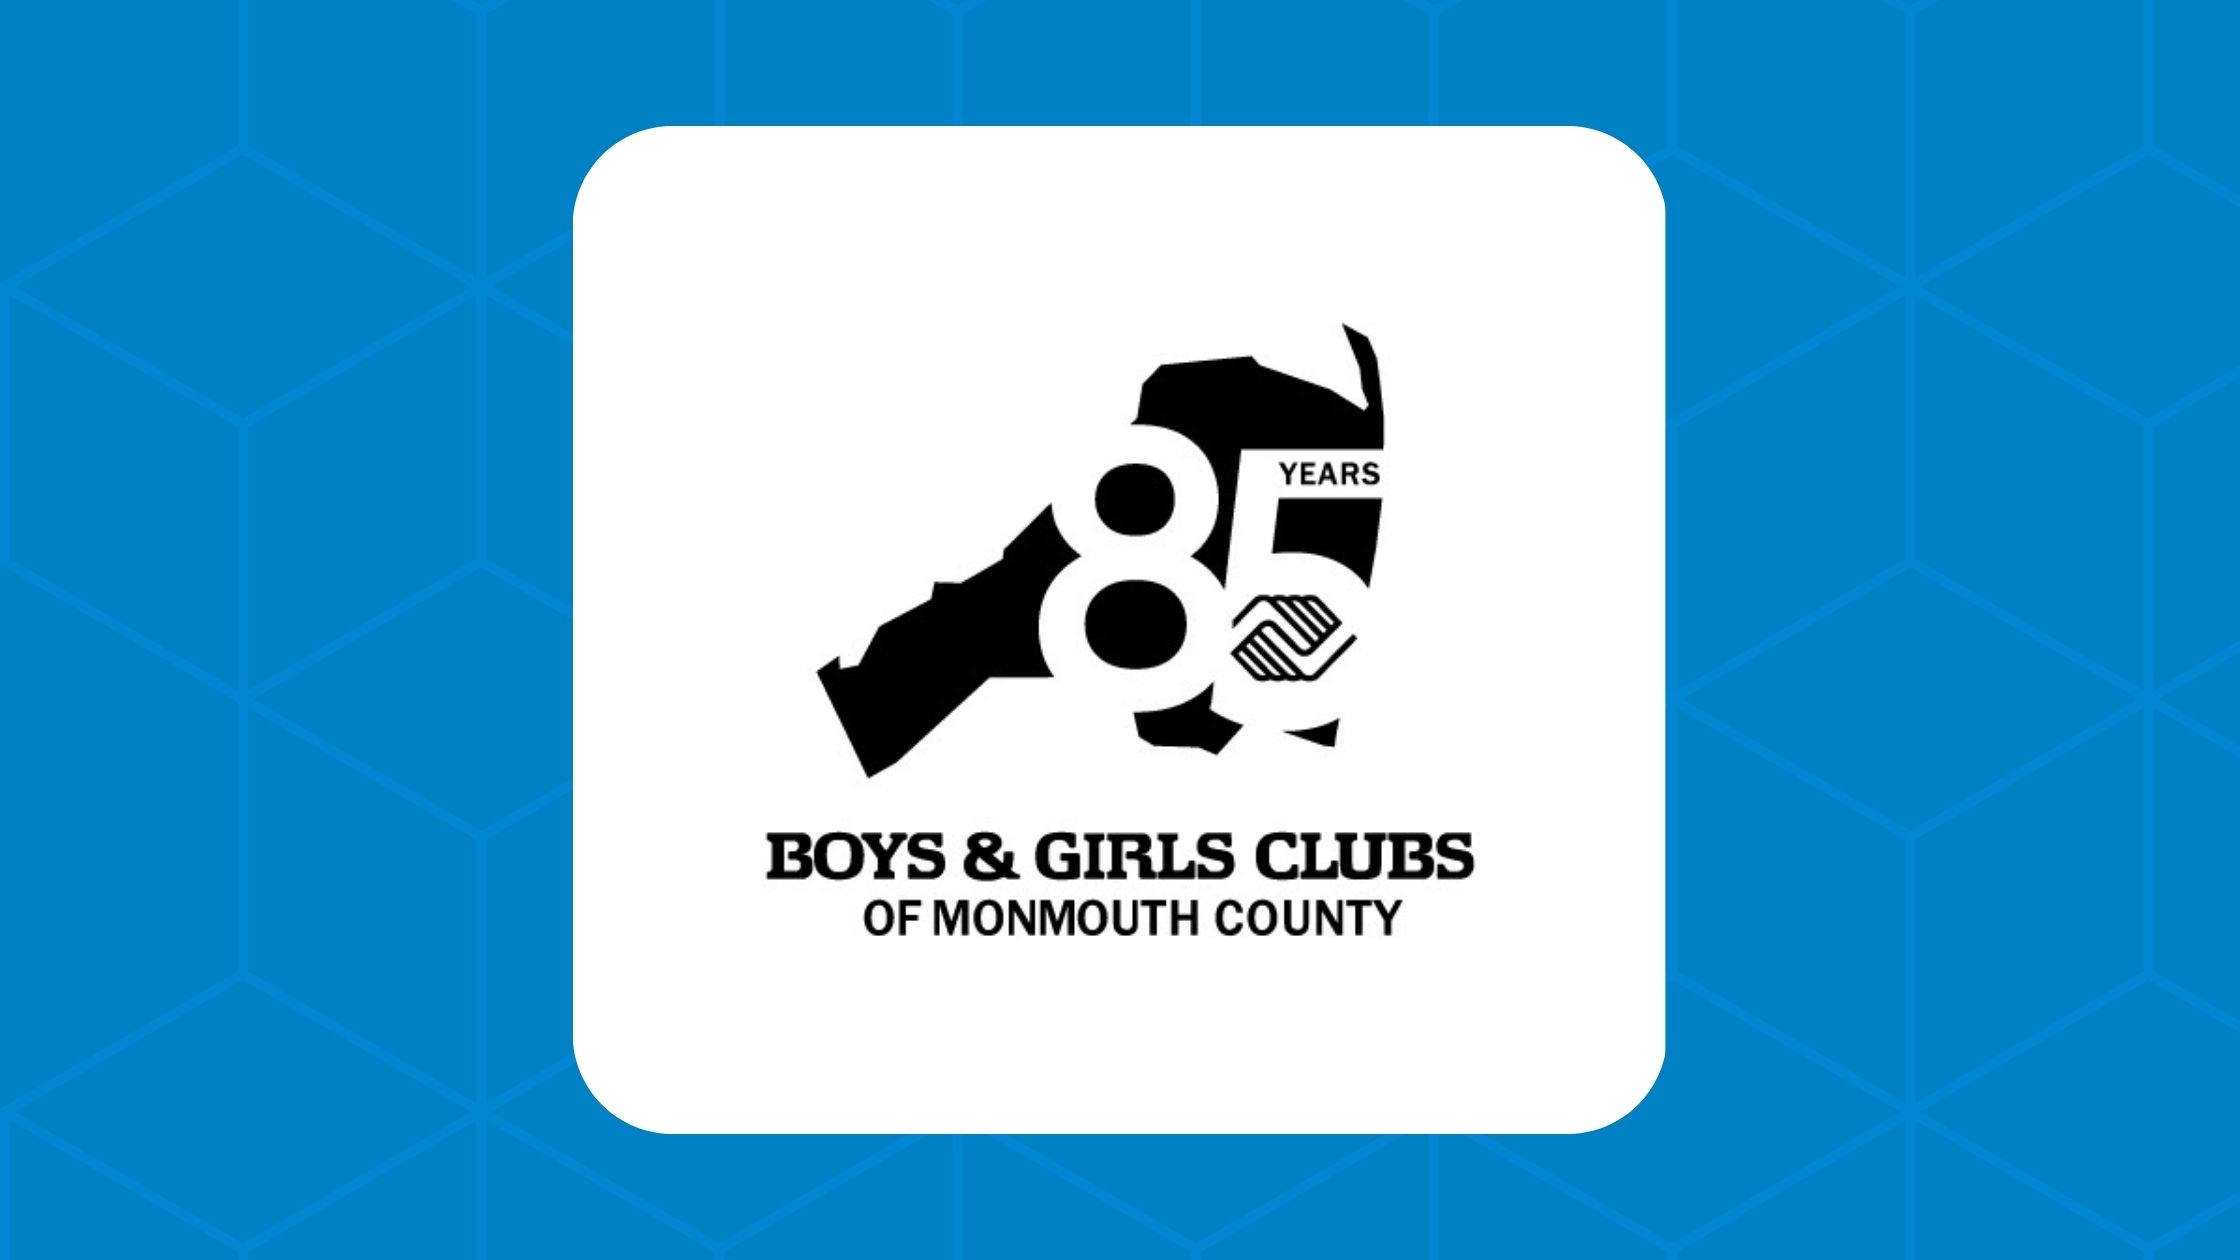 The Boys & Girls Clubs of Monmouth County will celebrate 85 years of operation this year.